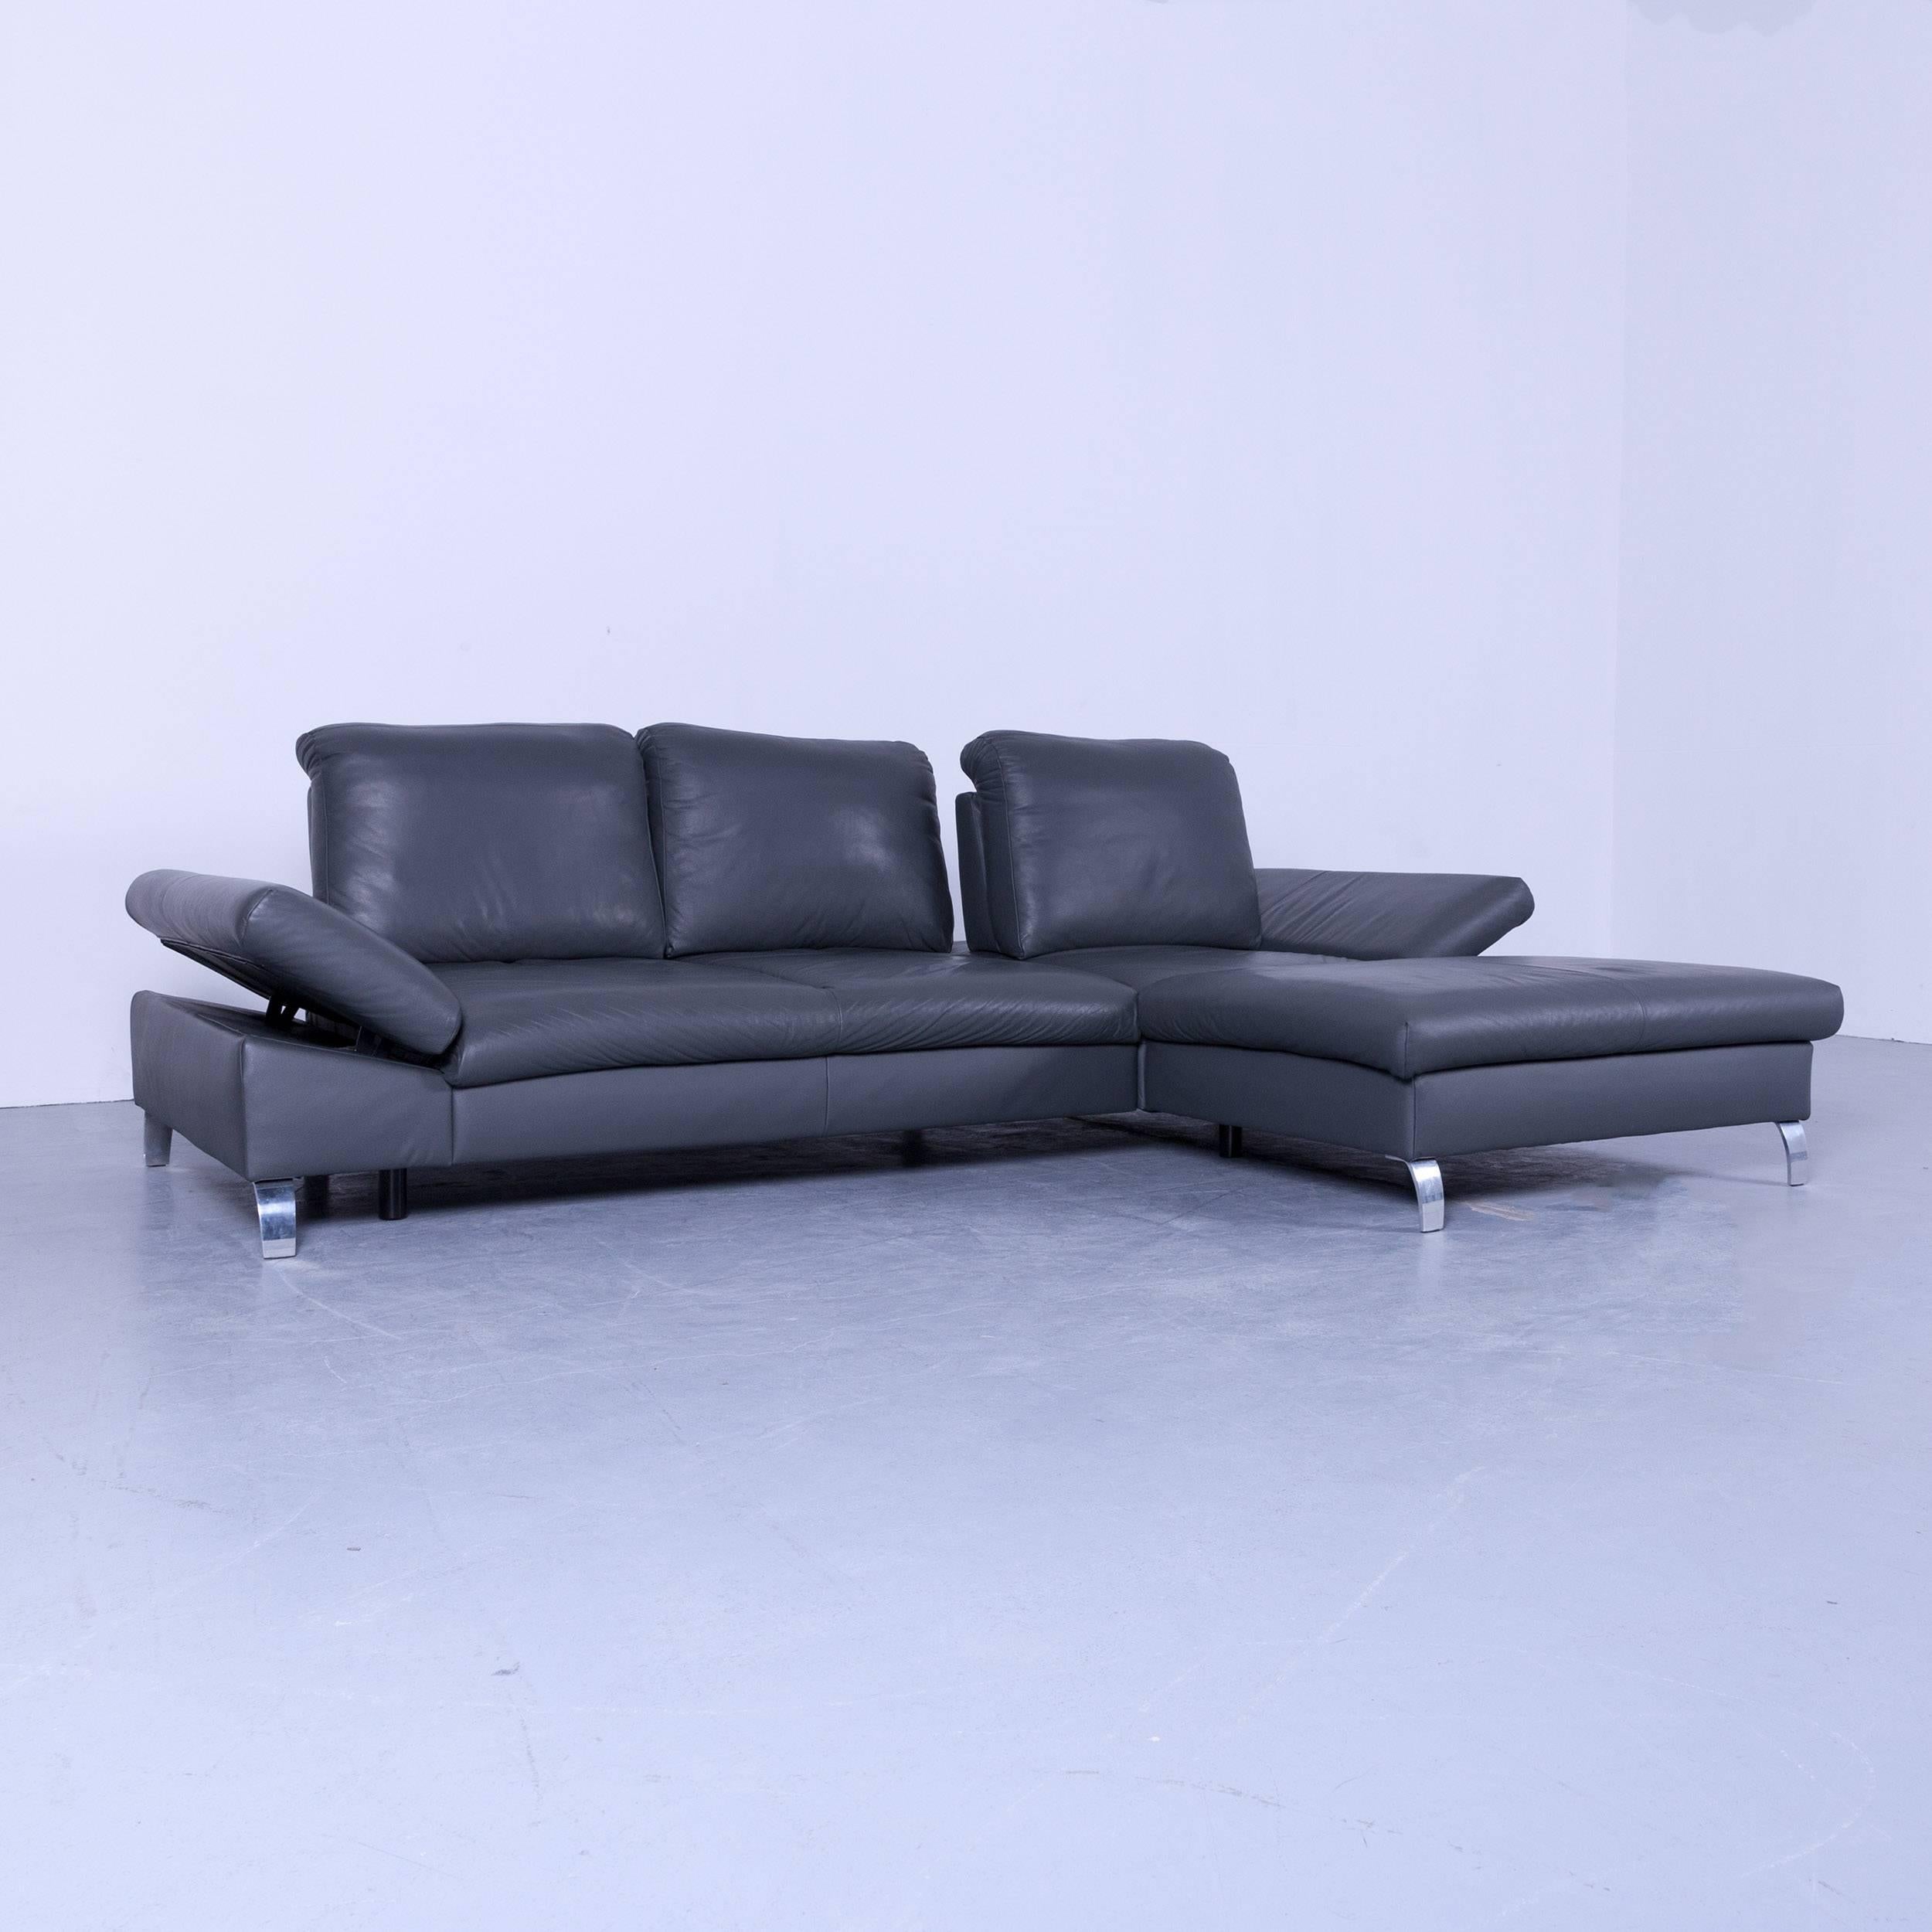 Designer corner sofa leather grey function couch modern, in a minimalistic and modern design, with convenient functions, made for pure comfort.